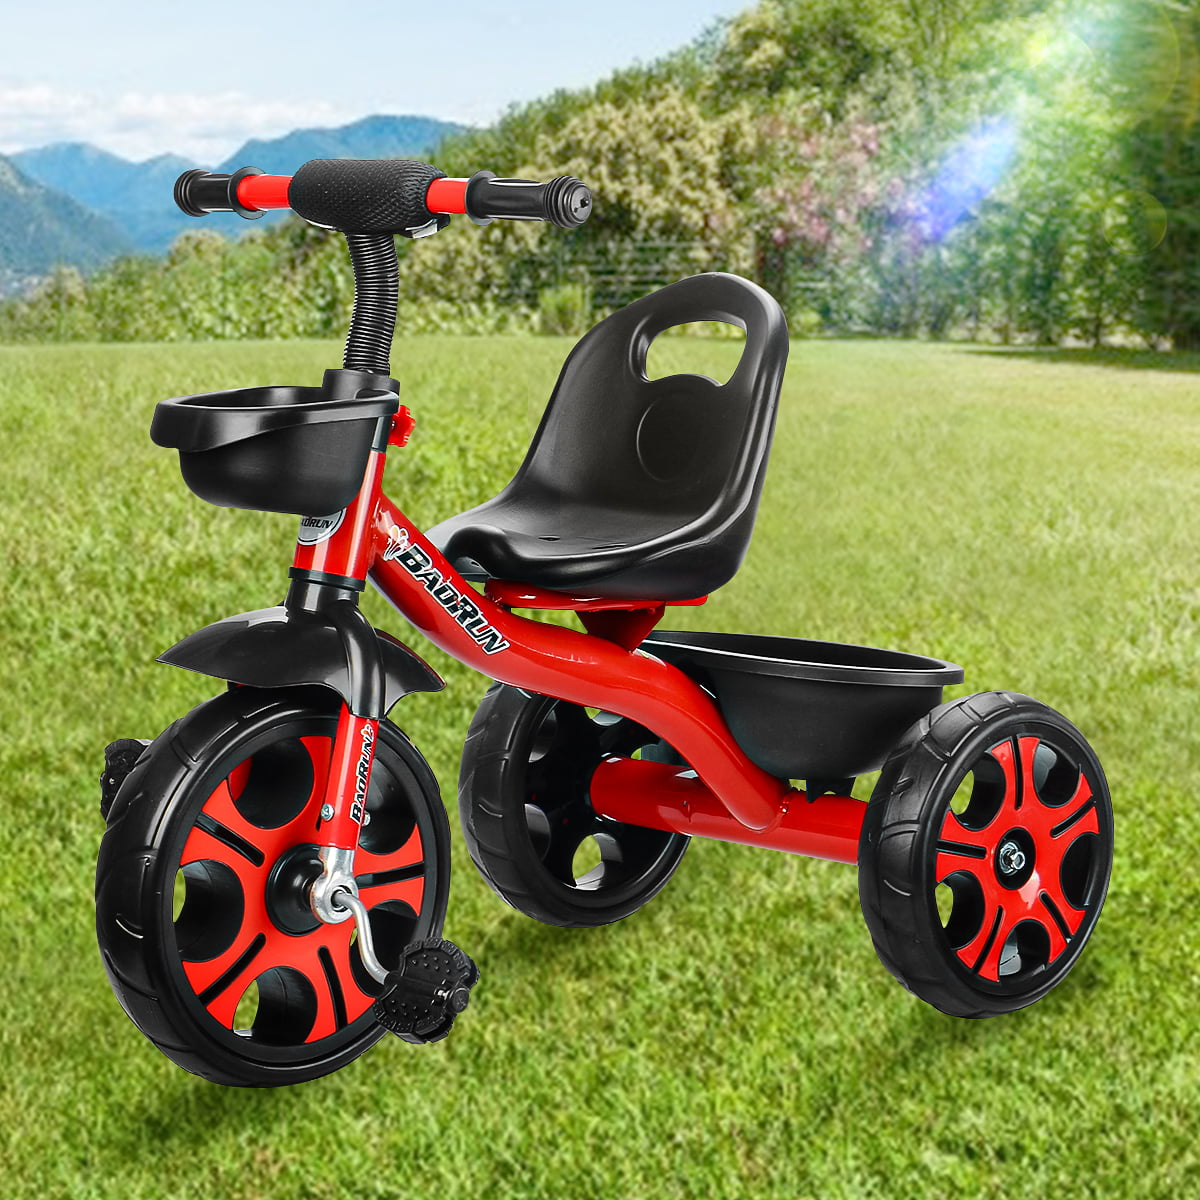 COOL-Series Kids Trike Toddlers Children Tricycle Stroller Trike 3 Wheel Pedal Bike Multicolor for 2 3 4 5 6 Years Old Boys Girls Indoor & Outdoor with Storage Bin and Cup Holder Red